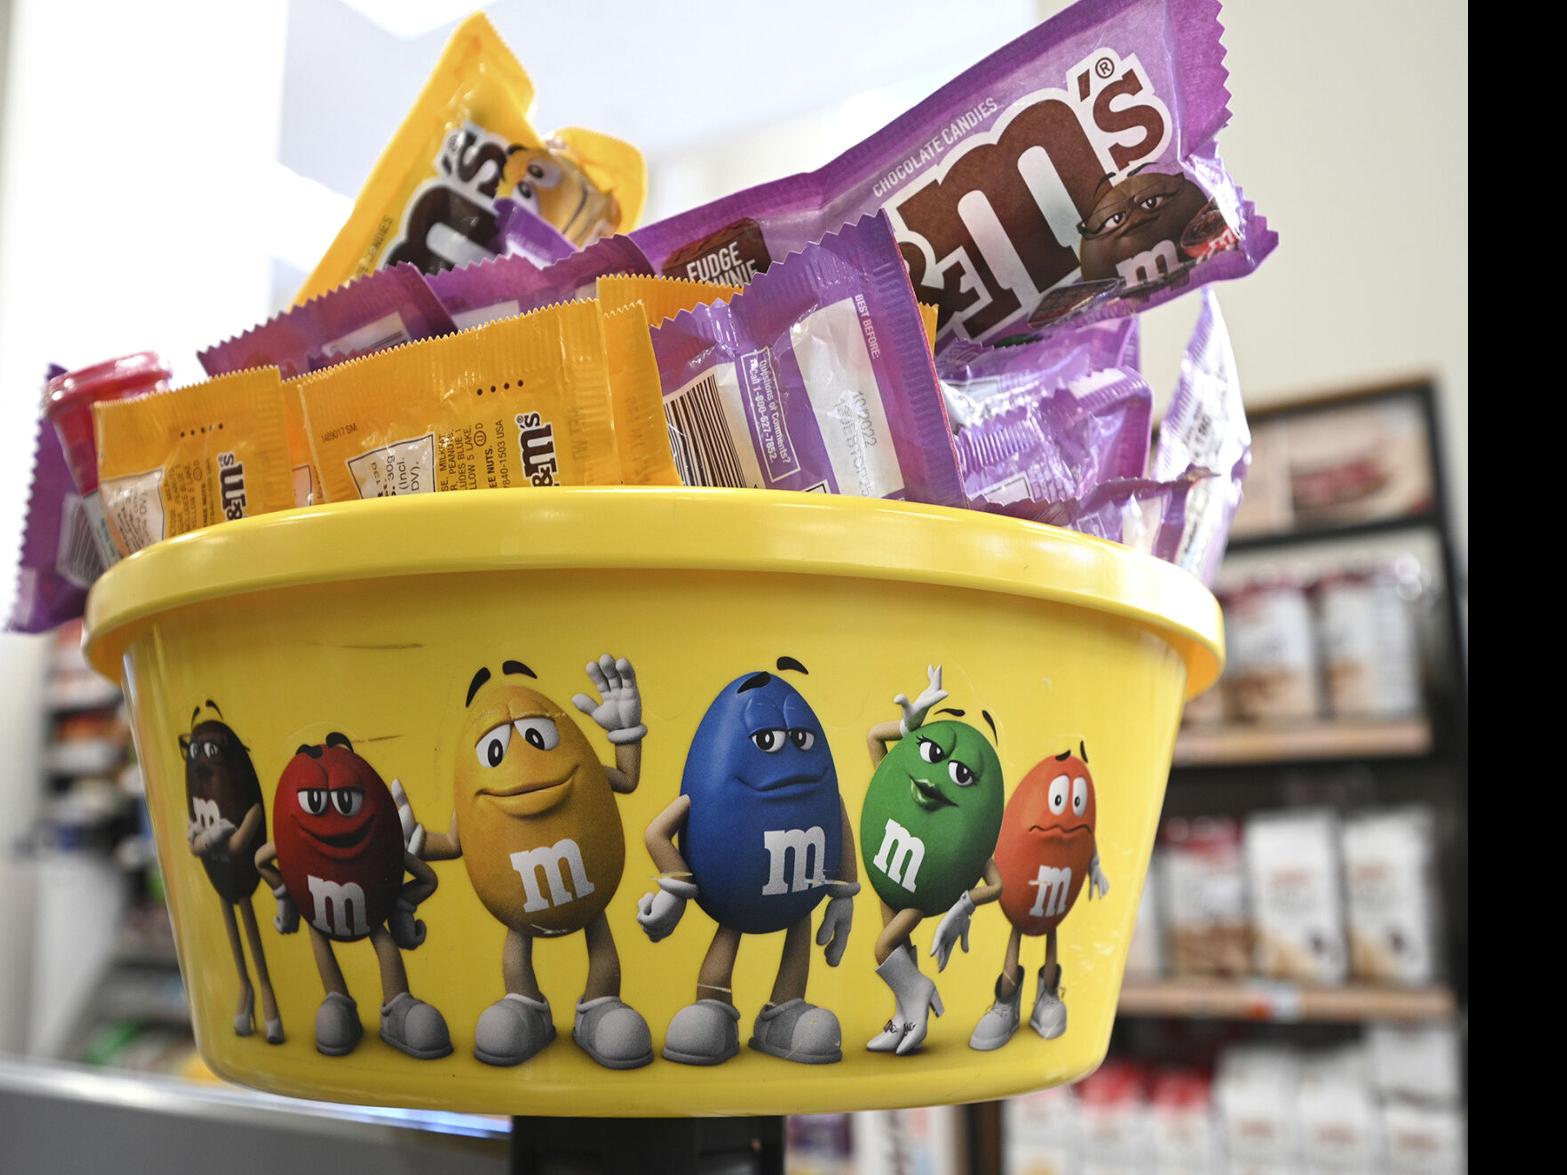 People Are Upset About an 'All-Female' Character Bag of M&Ms